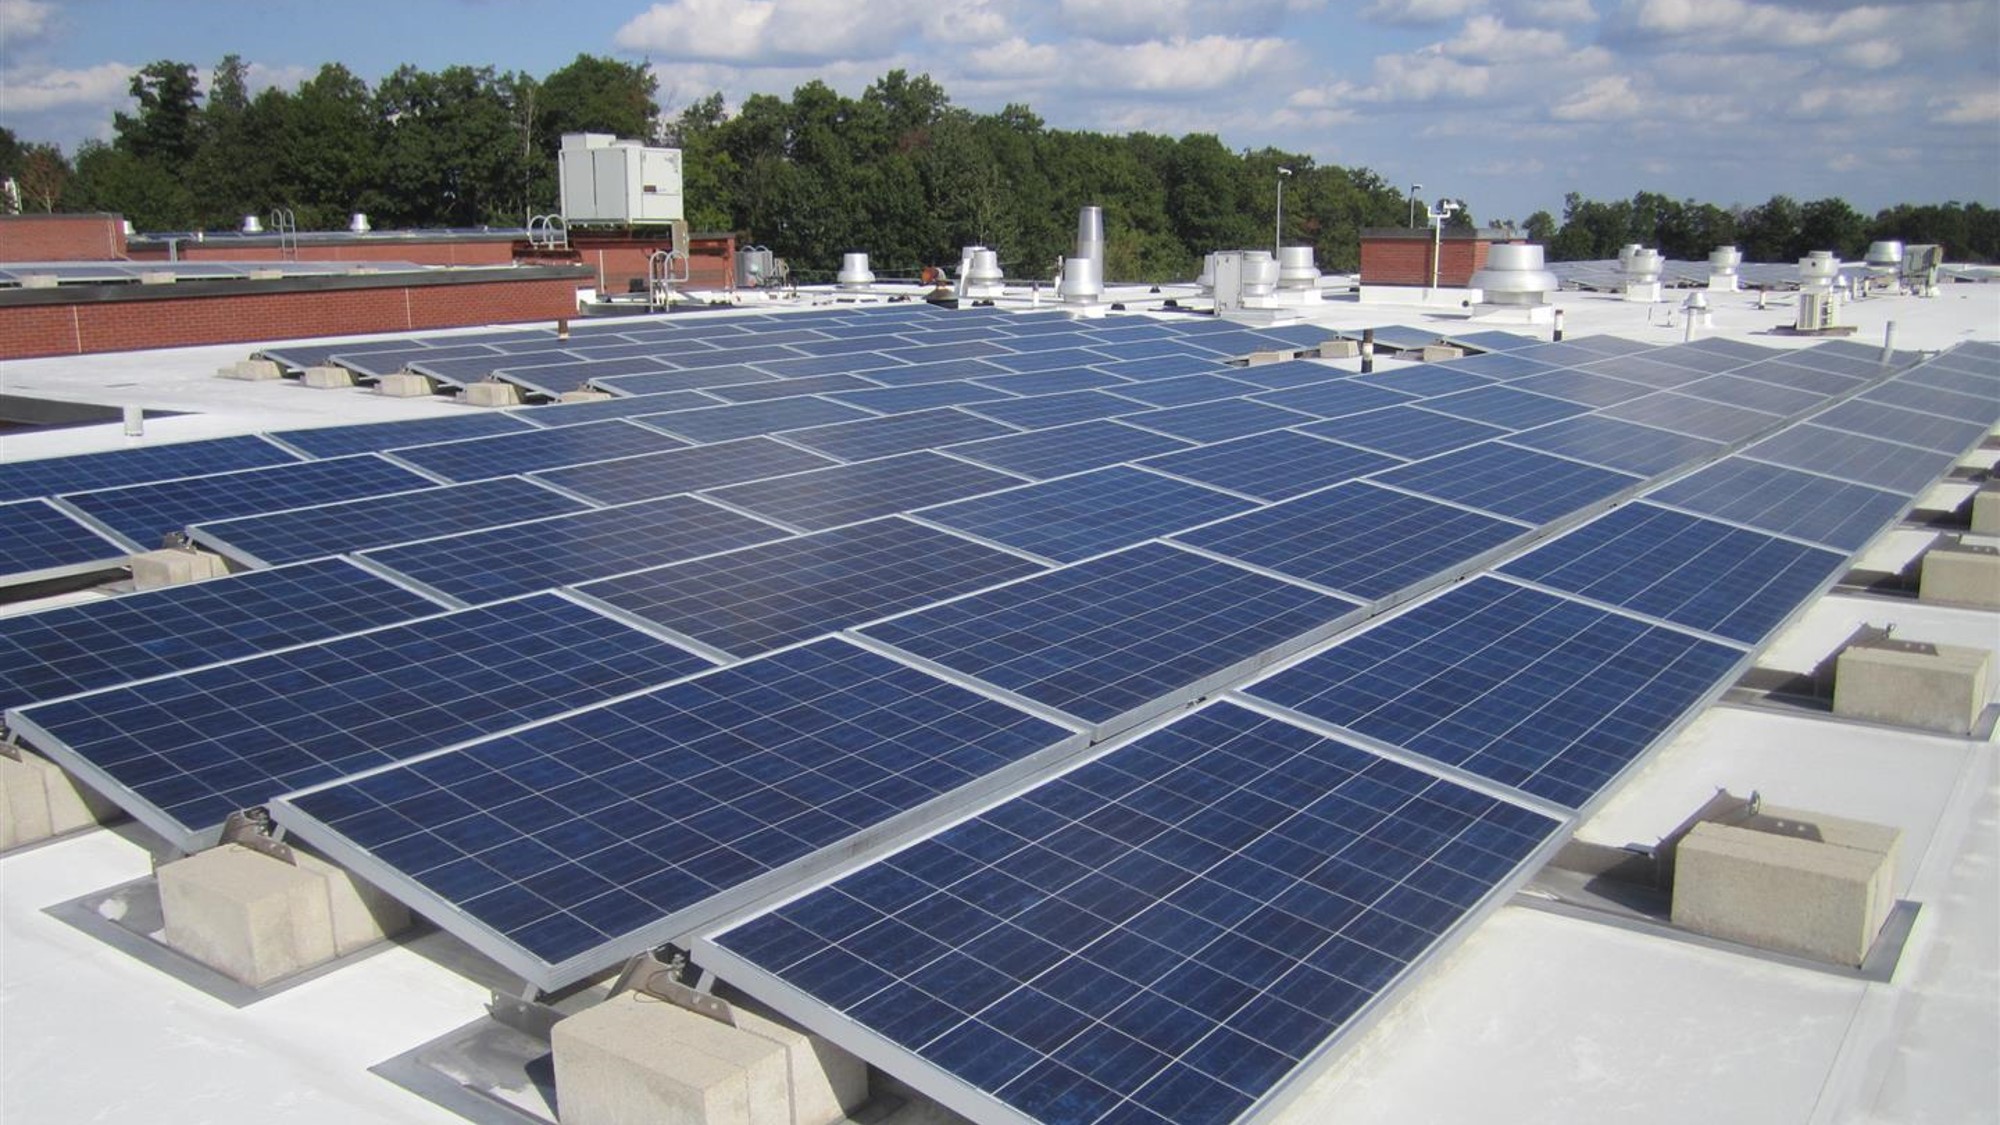 Photovoltaics: What You Need to Know Before Installing Solar Panels on